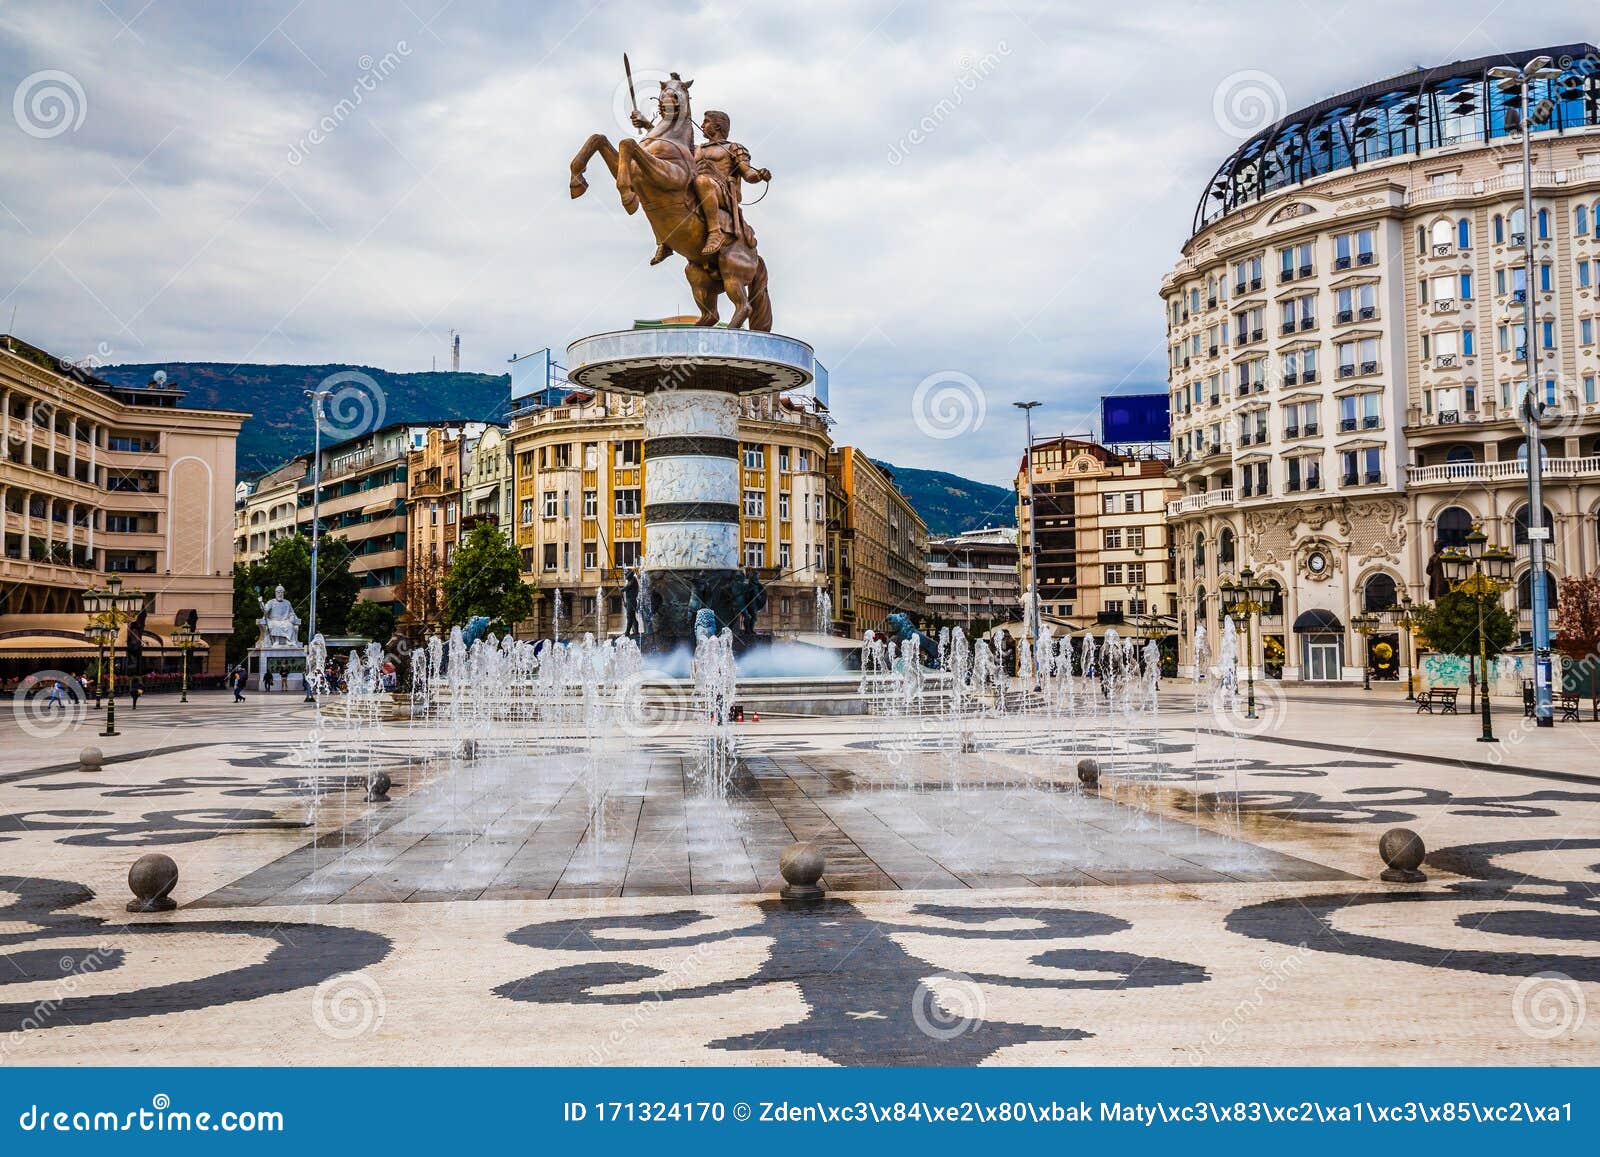 Warrior on a Horse Statue Skopje, North Macedonia Editorial Image